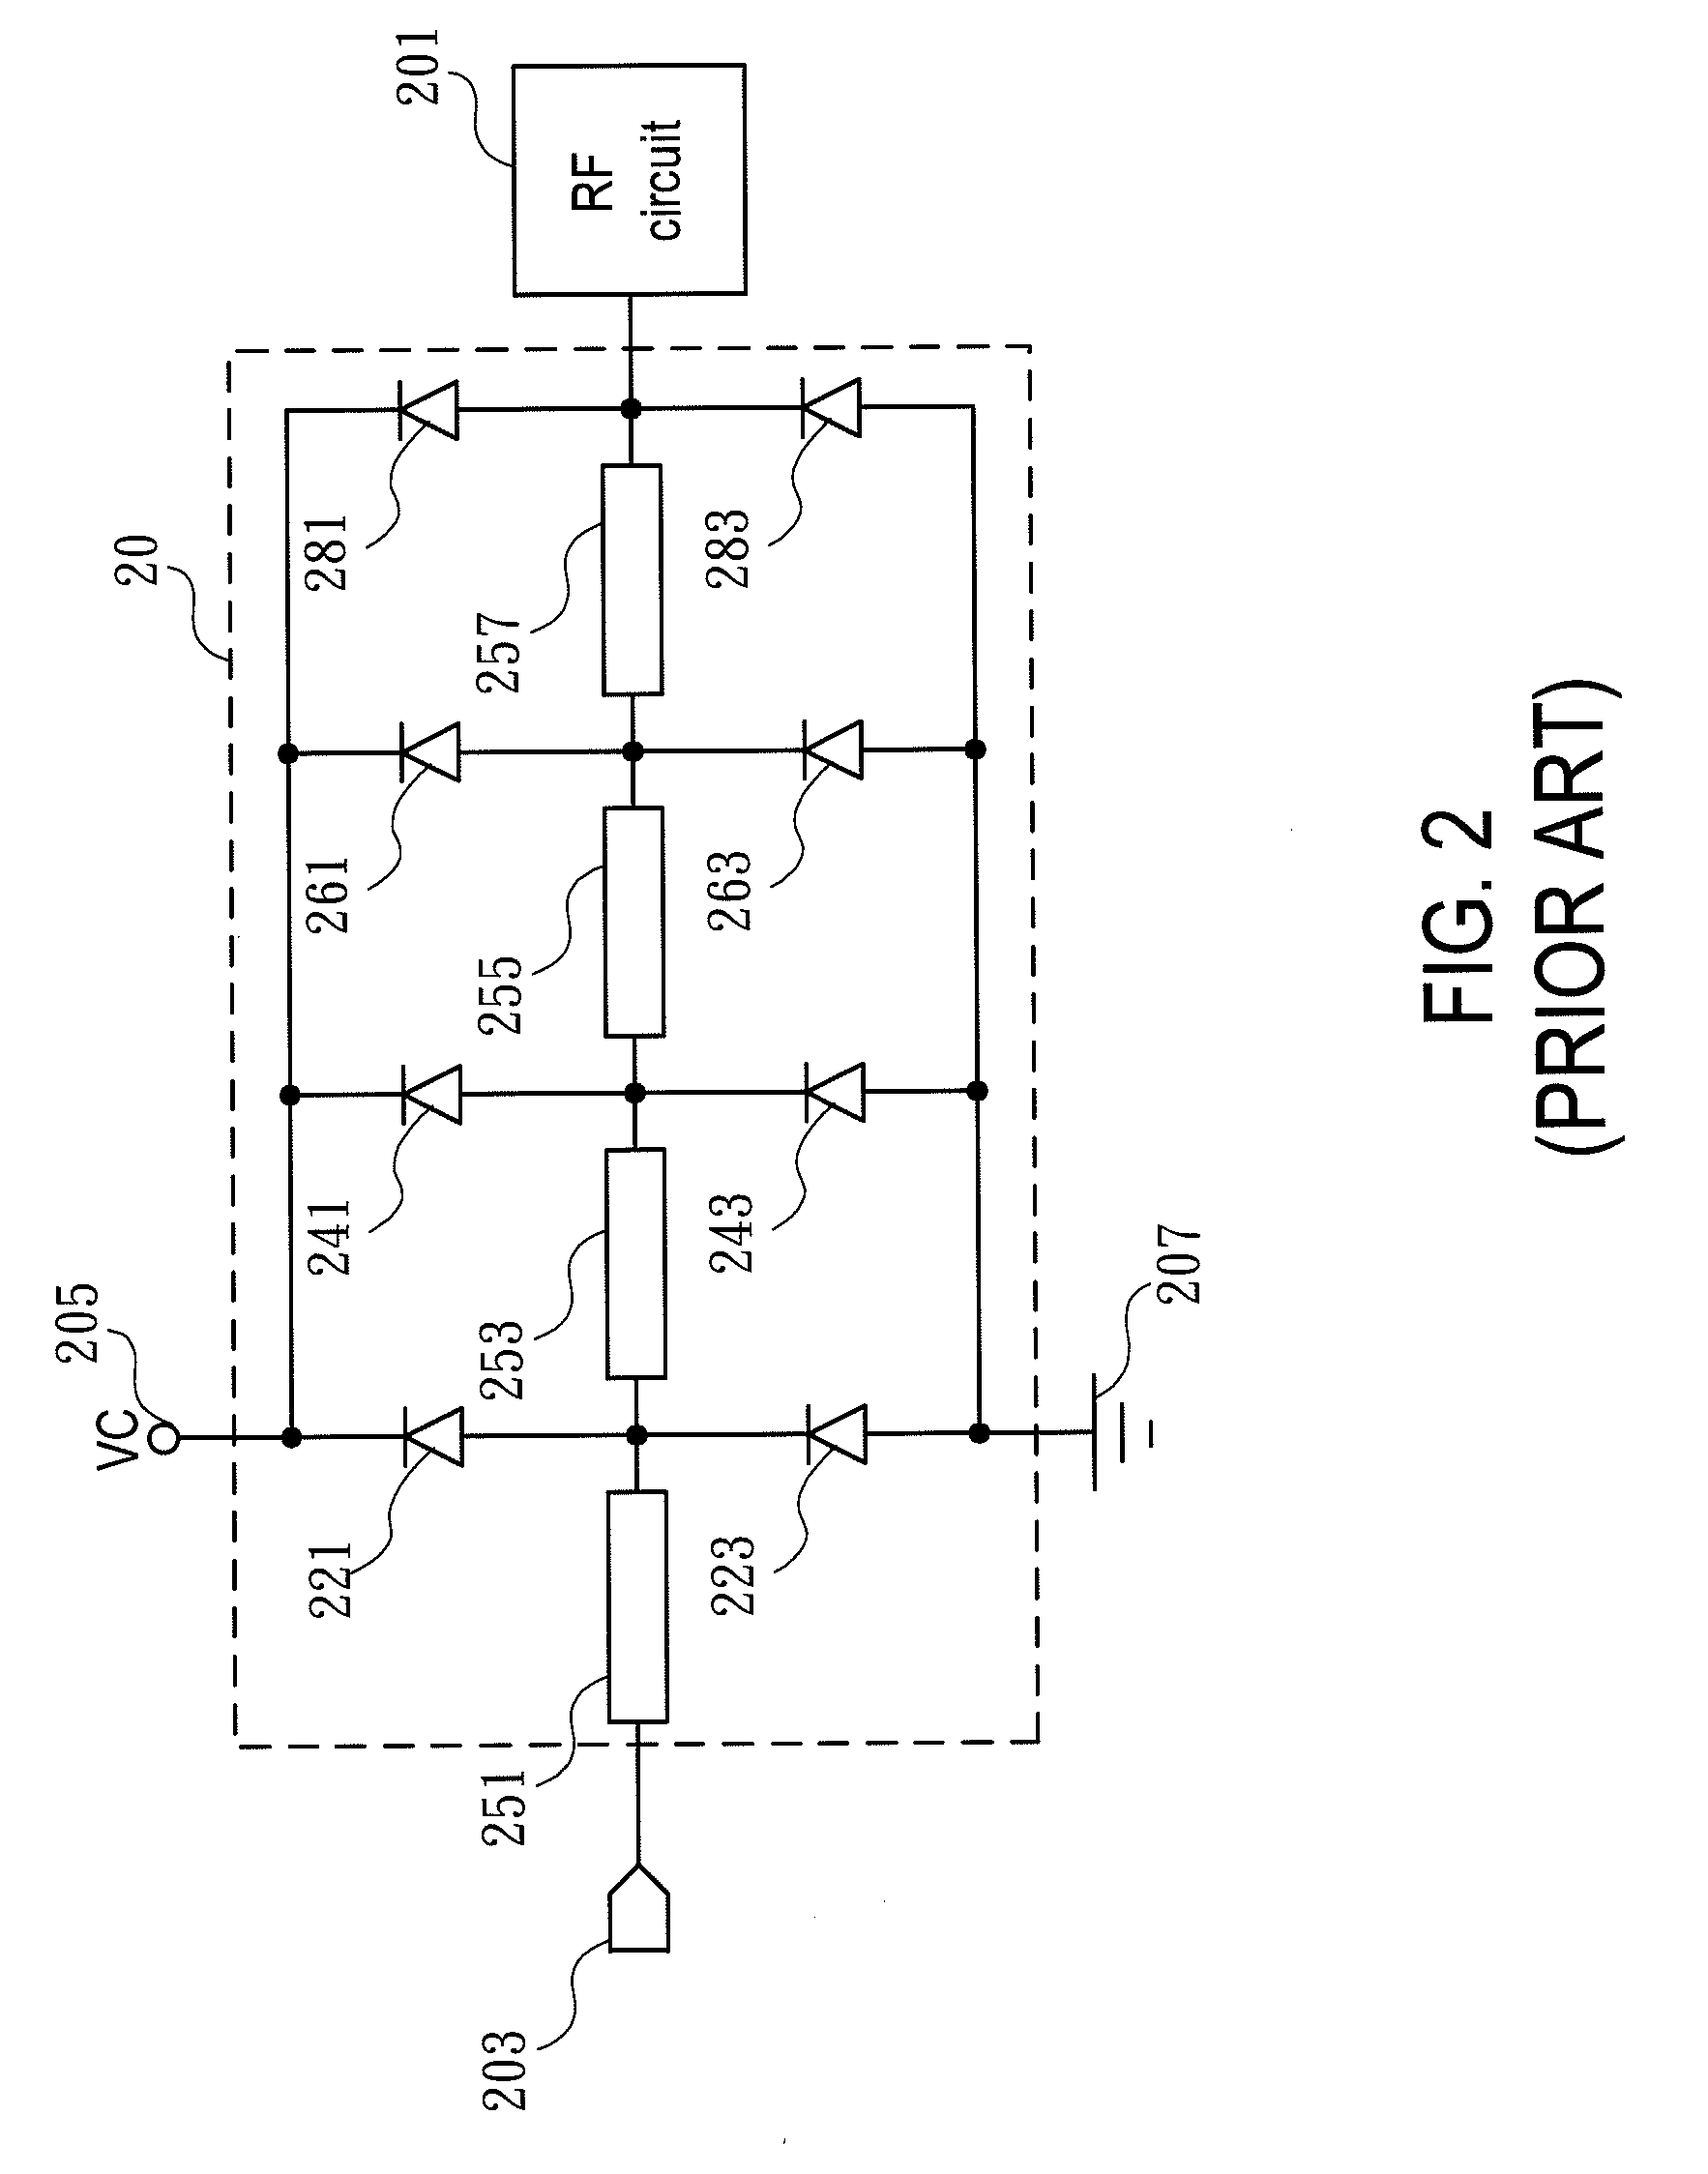 Band-pass structure electrostatic discharge protection circuit